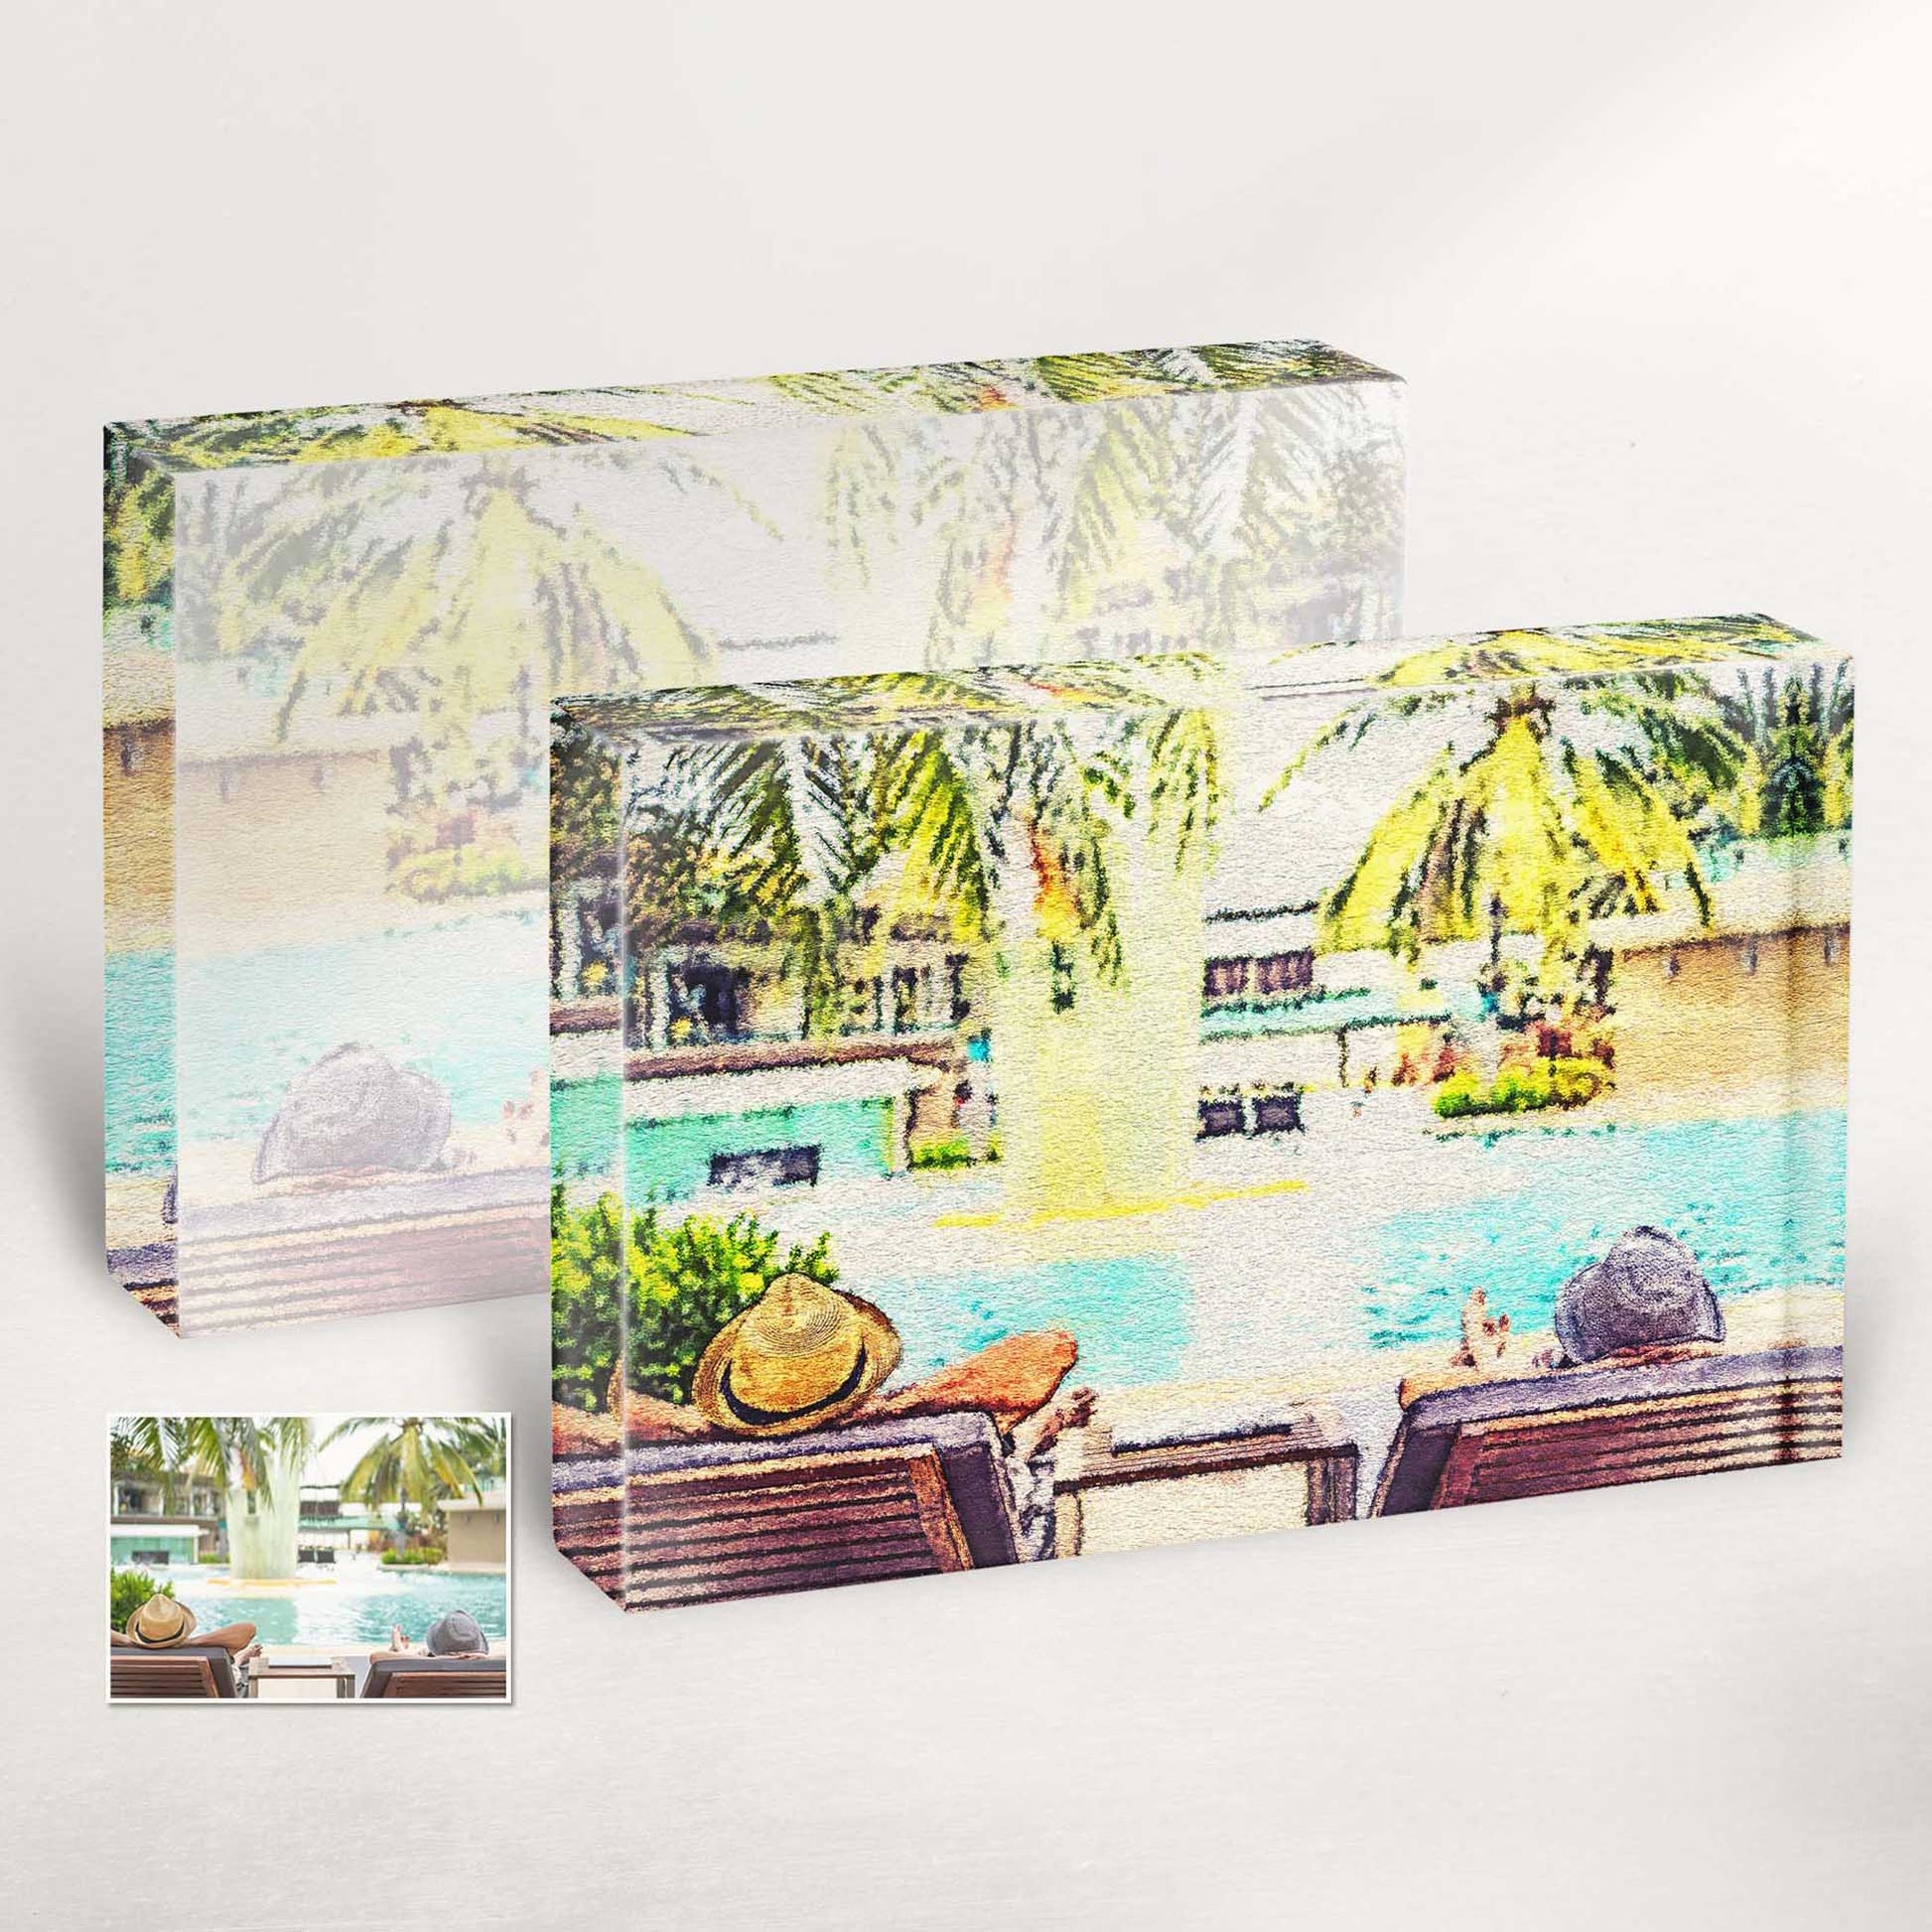 Elevate your home decor with our Personalised Aquarelle Acrylic Block Photo. Crafted from your own photo, each piece exudes the charm and beauty of a delicate watercolor painting. It's a unique and thoughtful gift